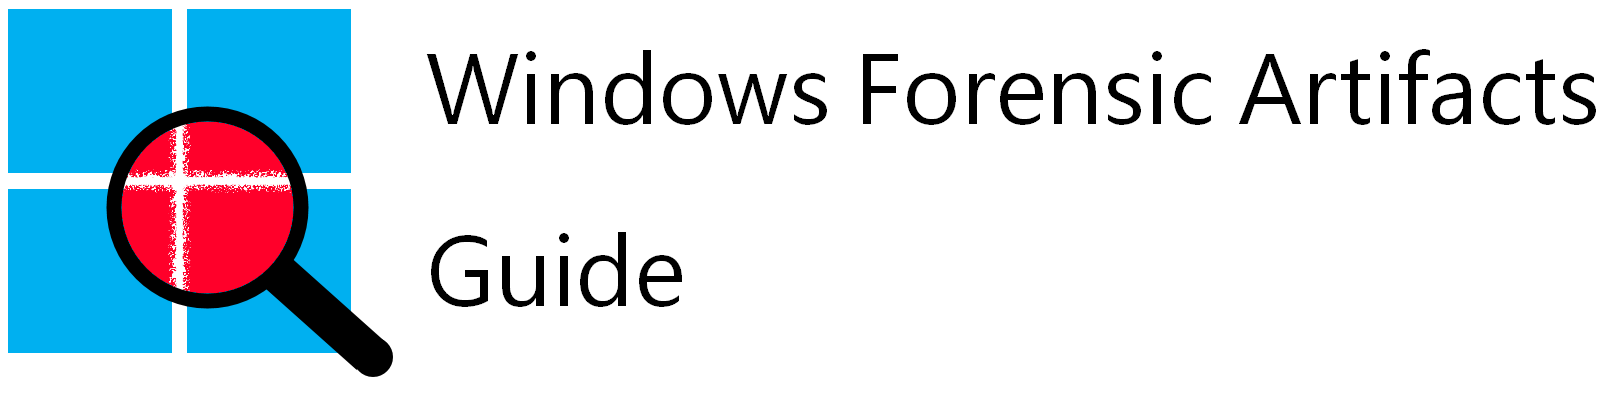 Windows Forensic Artifacts Guide